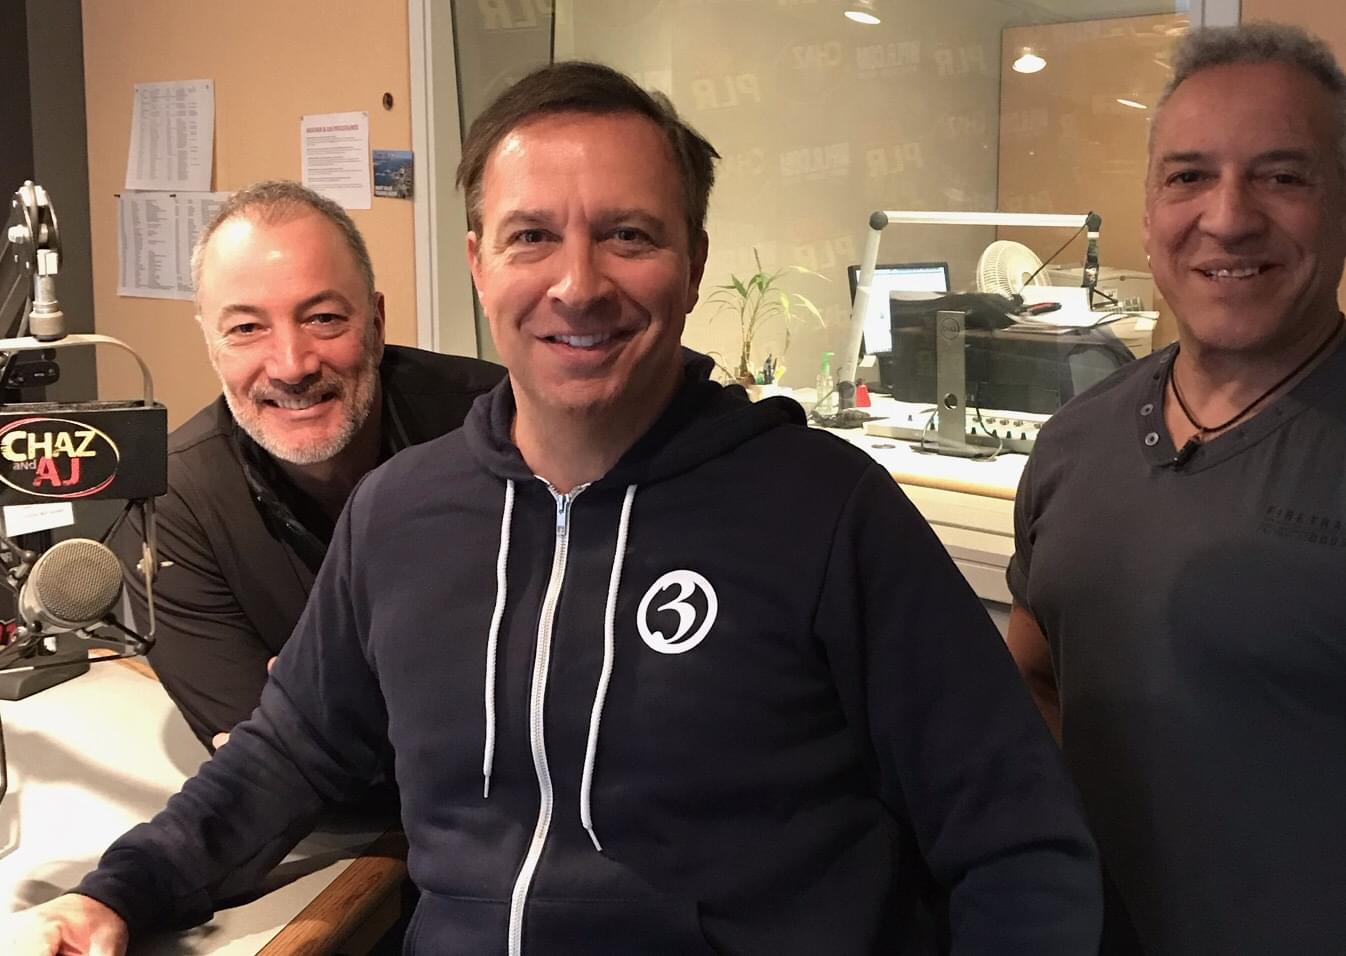 PODCAST – Tuesday, February 4: Dennis House Stops By, Crazy Tour Rider Requests, And Norm Pattis Tells Us What’s Next For The Fotis Dulos Defense Team